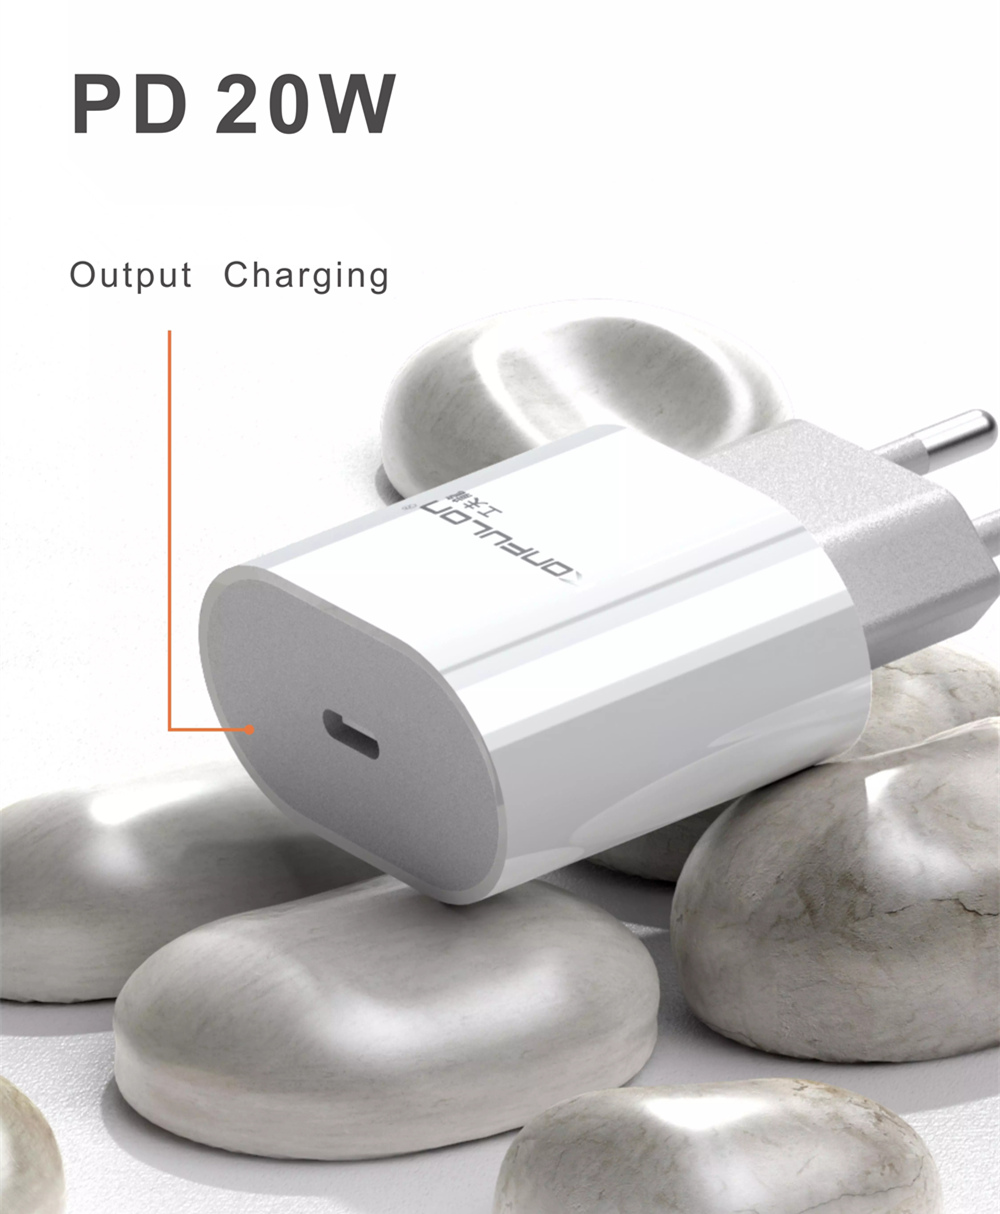 Konfulon C71 20W PD Charger Fast Charging with Type-C Charging Cable US EU Plug for iPhone 12 Pro Max for Samsung Galaxy S21 Note S20 ultra Huawei Mate40 OnePlus 8 Pro